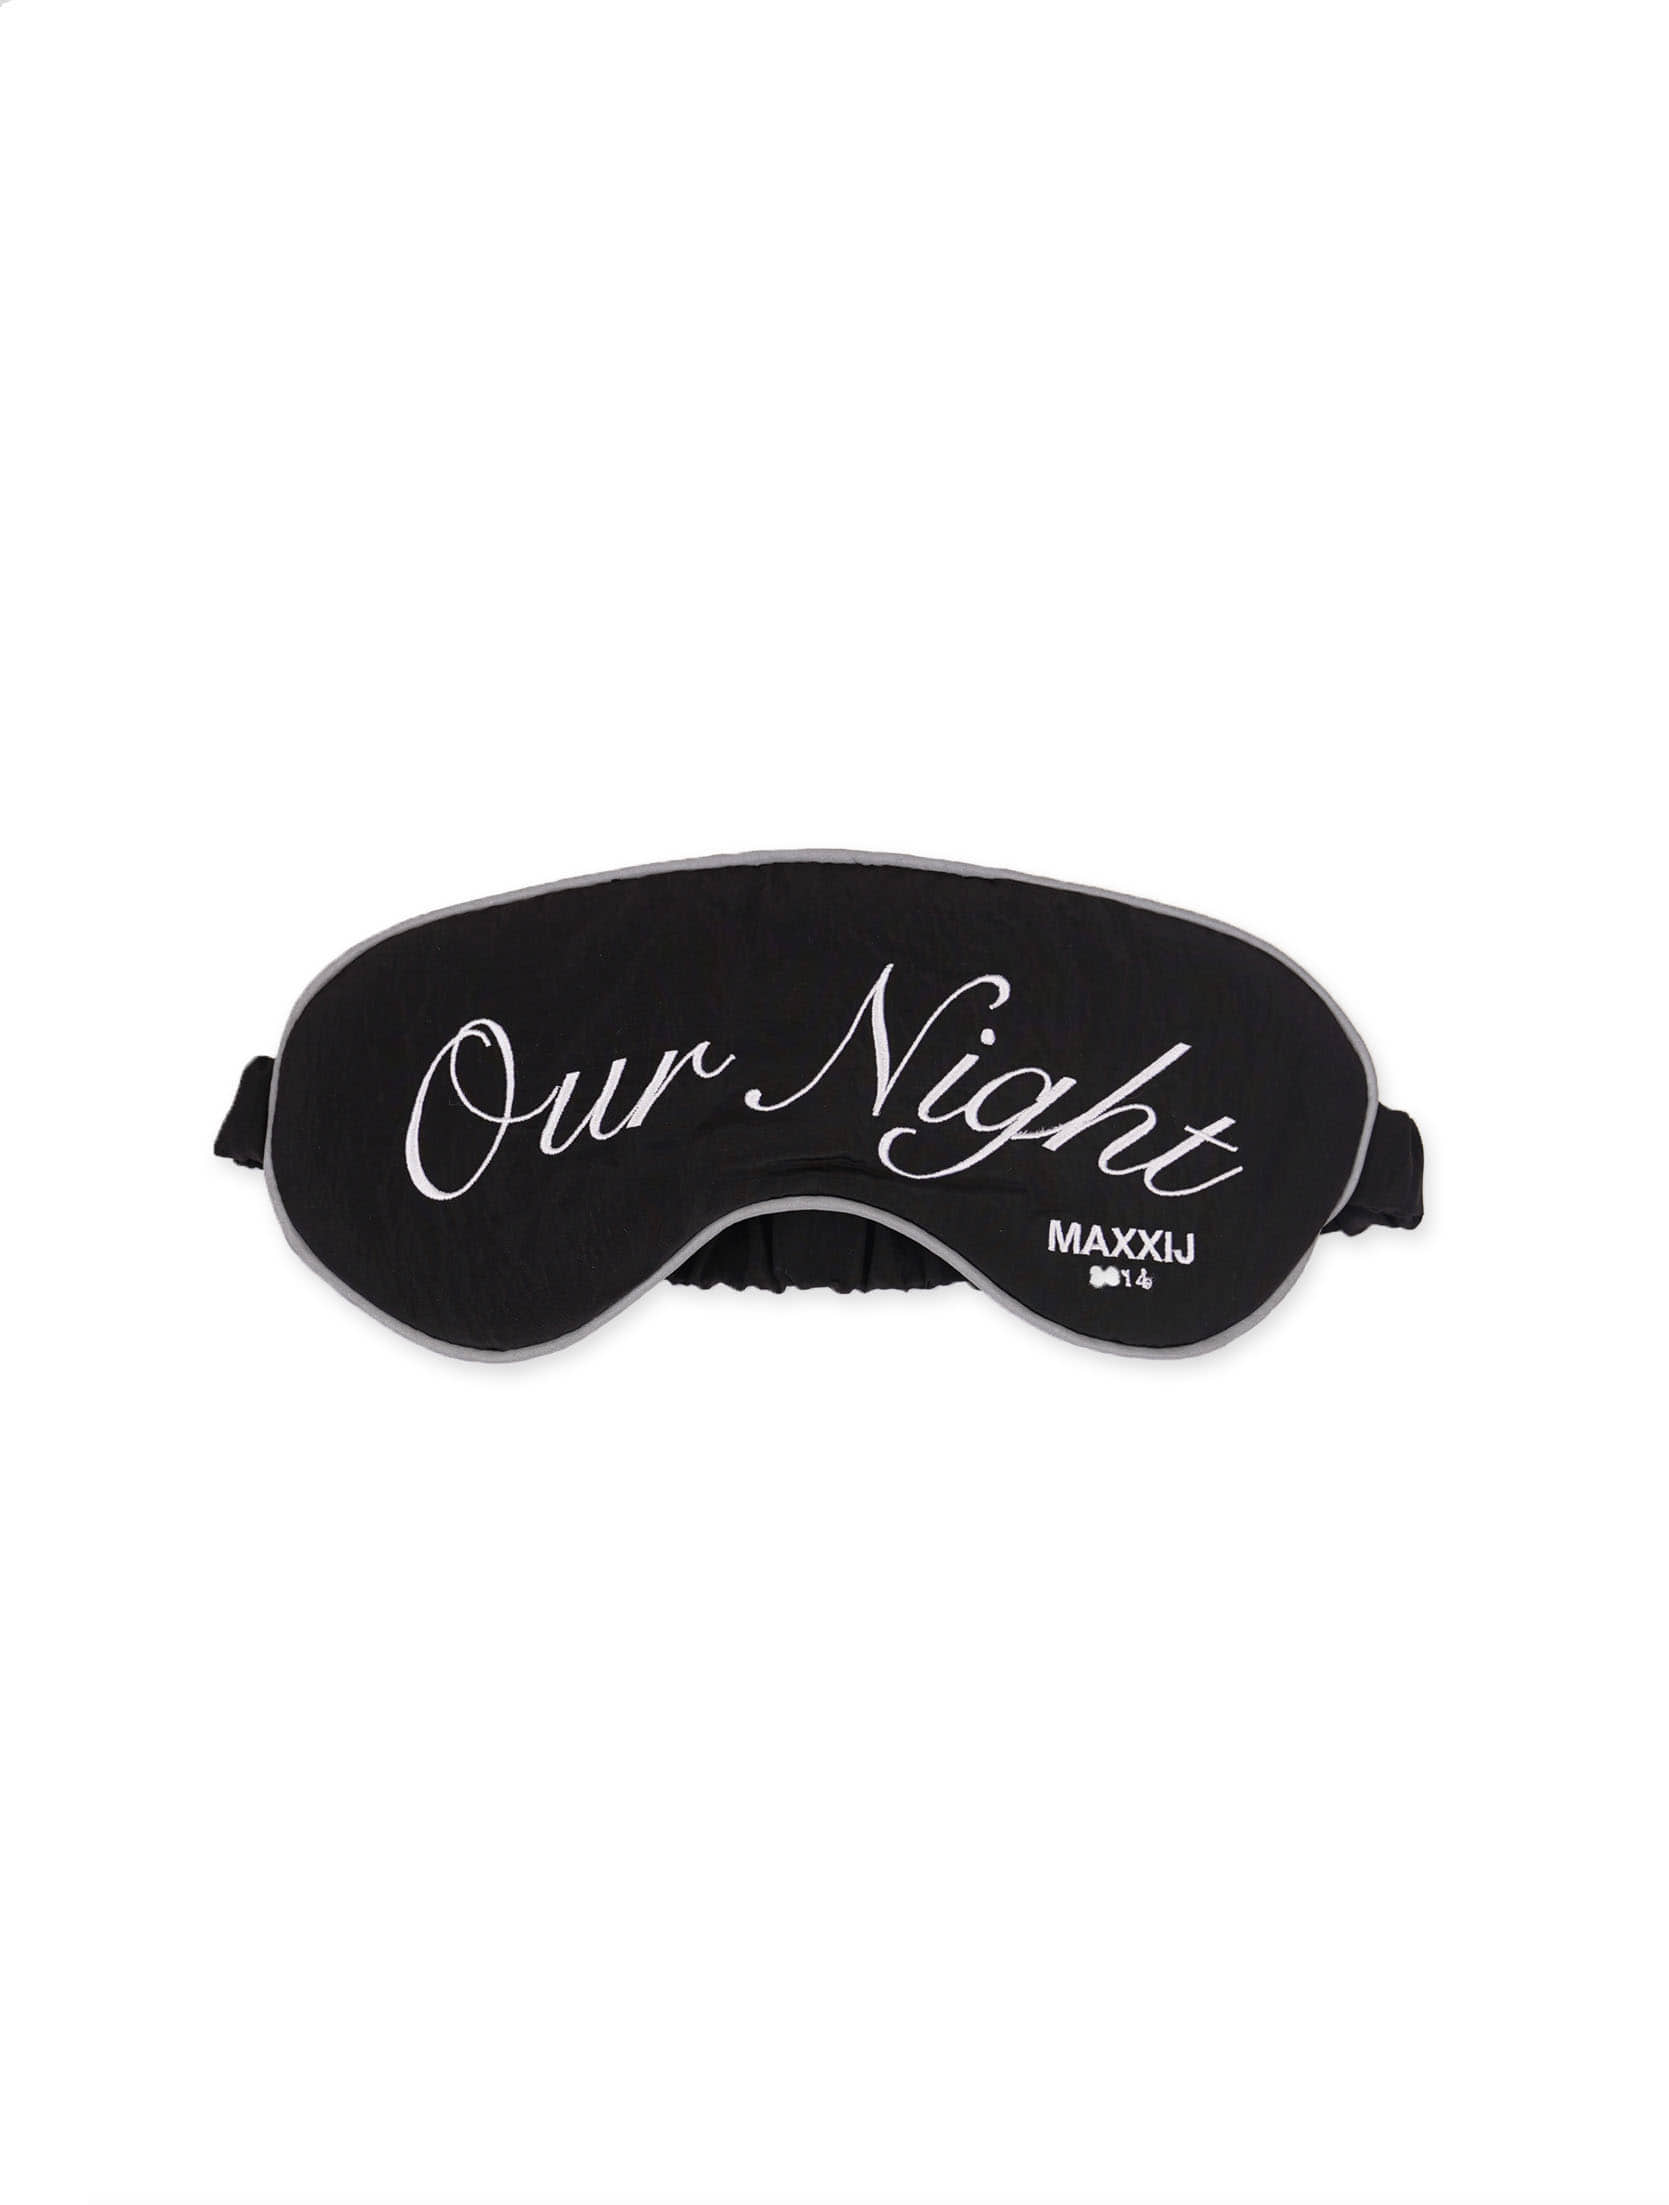 Our Night Sleeping mask